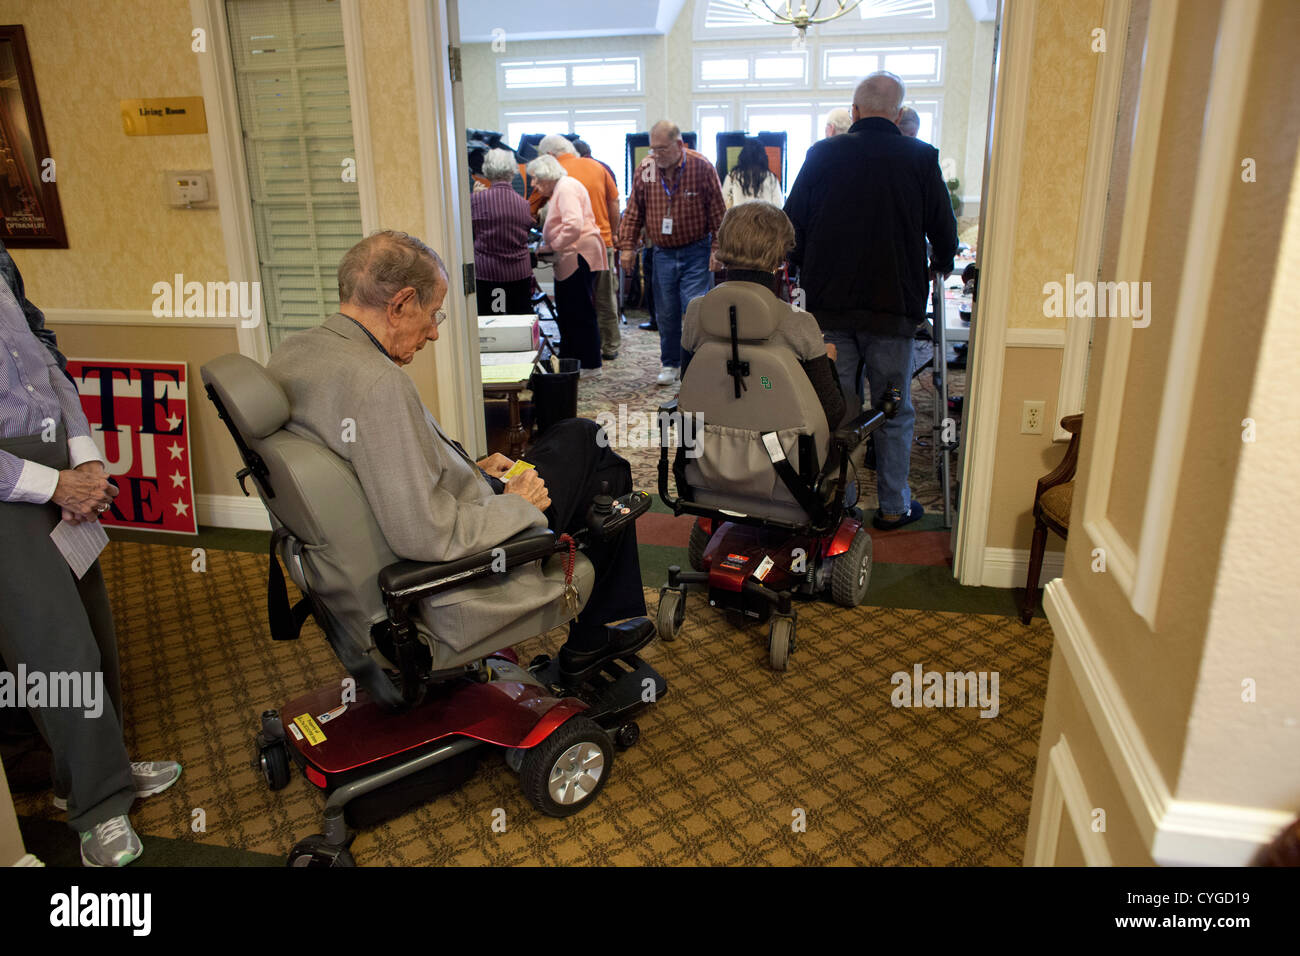 Senior citizens participate in early voting at an assisted living center in Austin TX in advance of the Nov. 6 general election Stock Photo